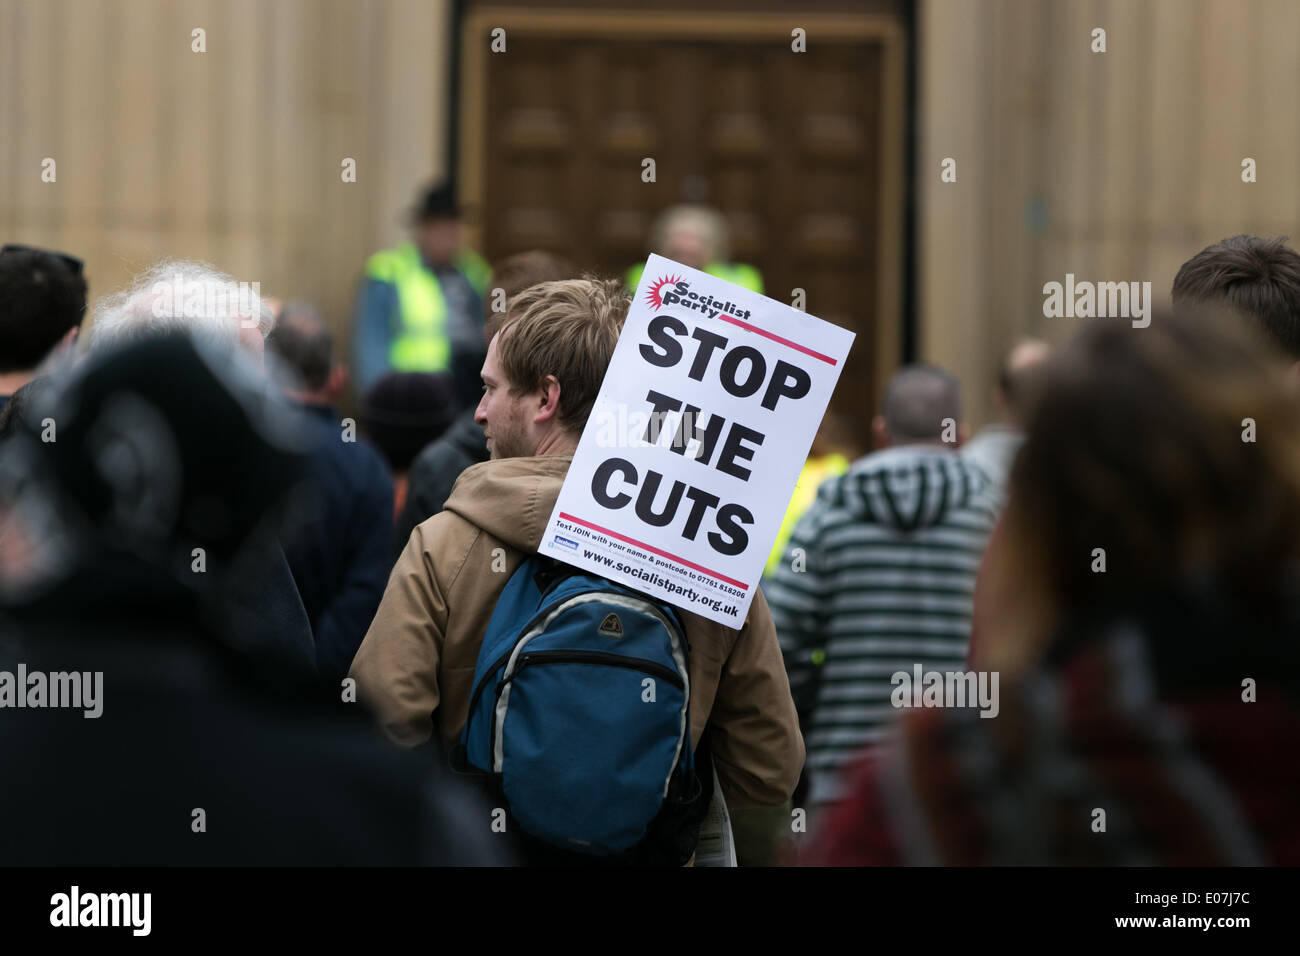 Salford, Manchester, UK. 5th May 2014. Demonstrators marched from Bexley Square in Salford to Cathedral Gardens in Manchester city centre on Monday, May 5, 2014, to protest against various issues including government cuts, bedroom tax, fracking and UKIP (UK Independance Party). Credit:  Christopher Middleton/Alamy Live News Stock Photo